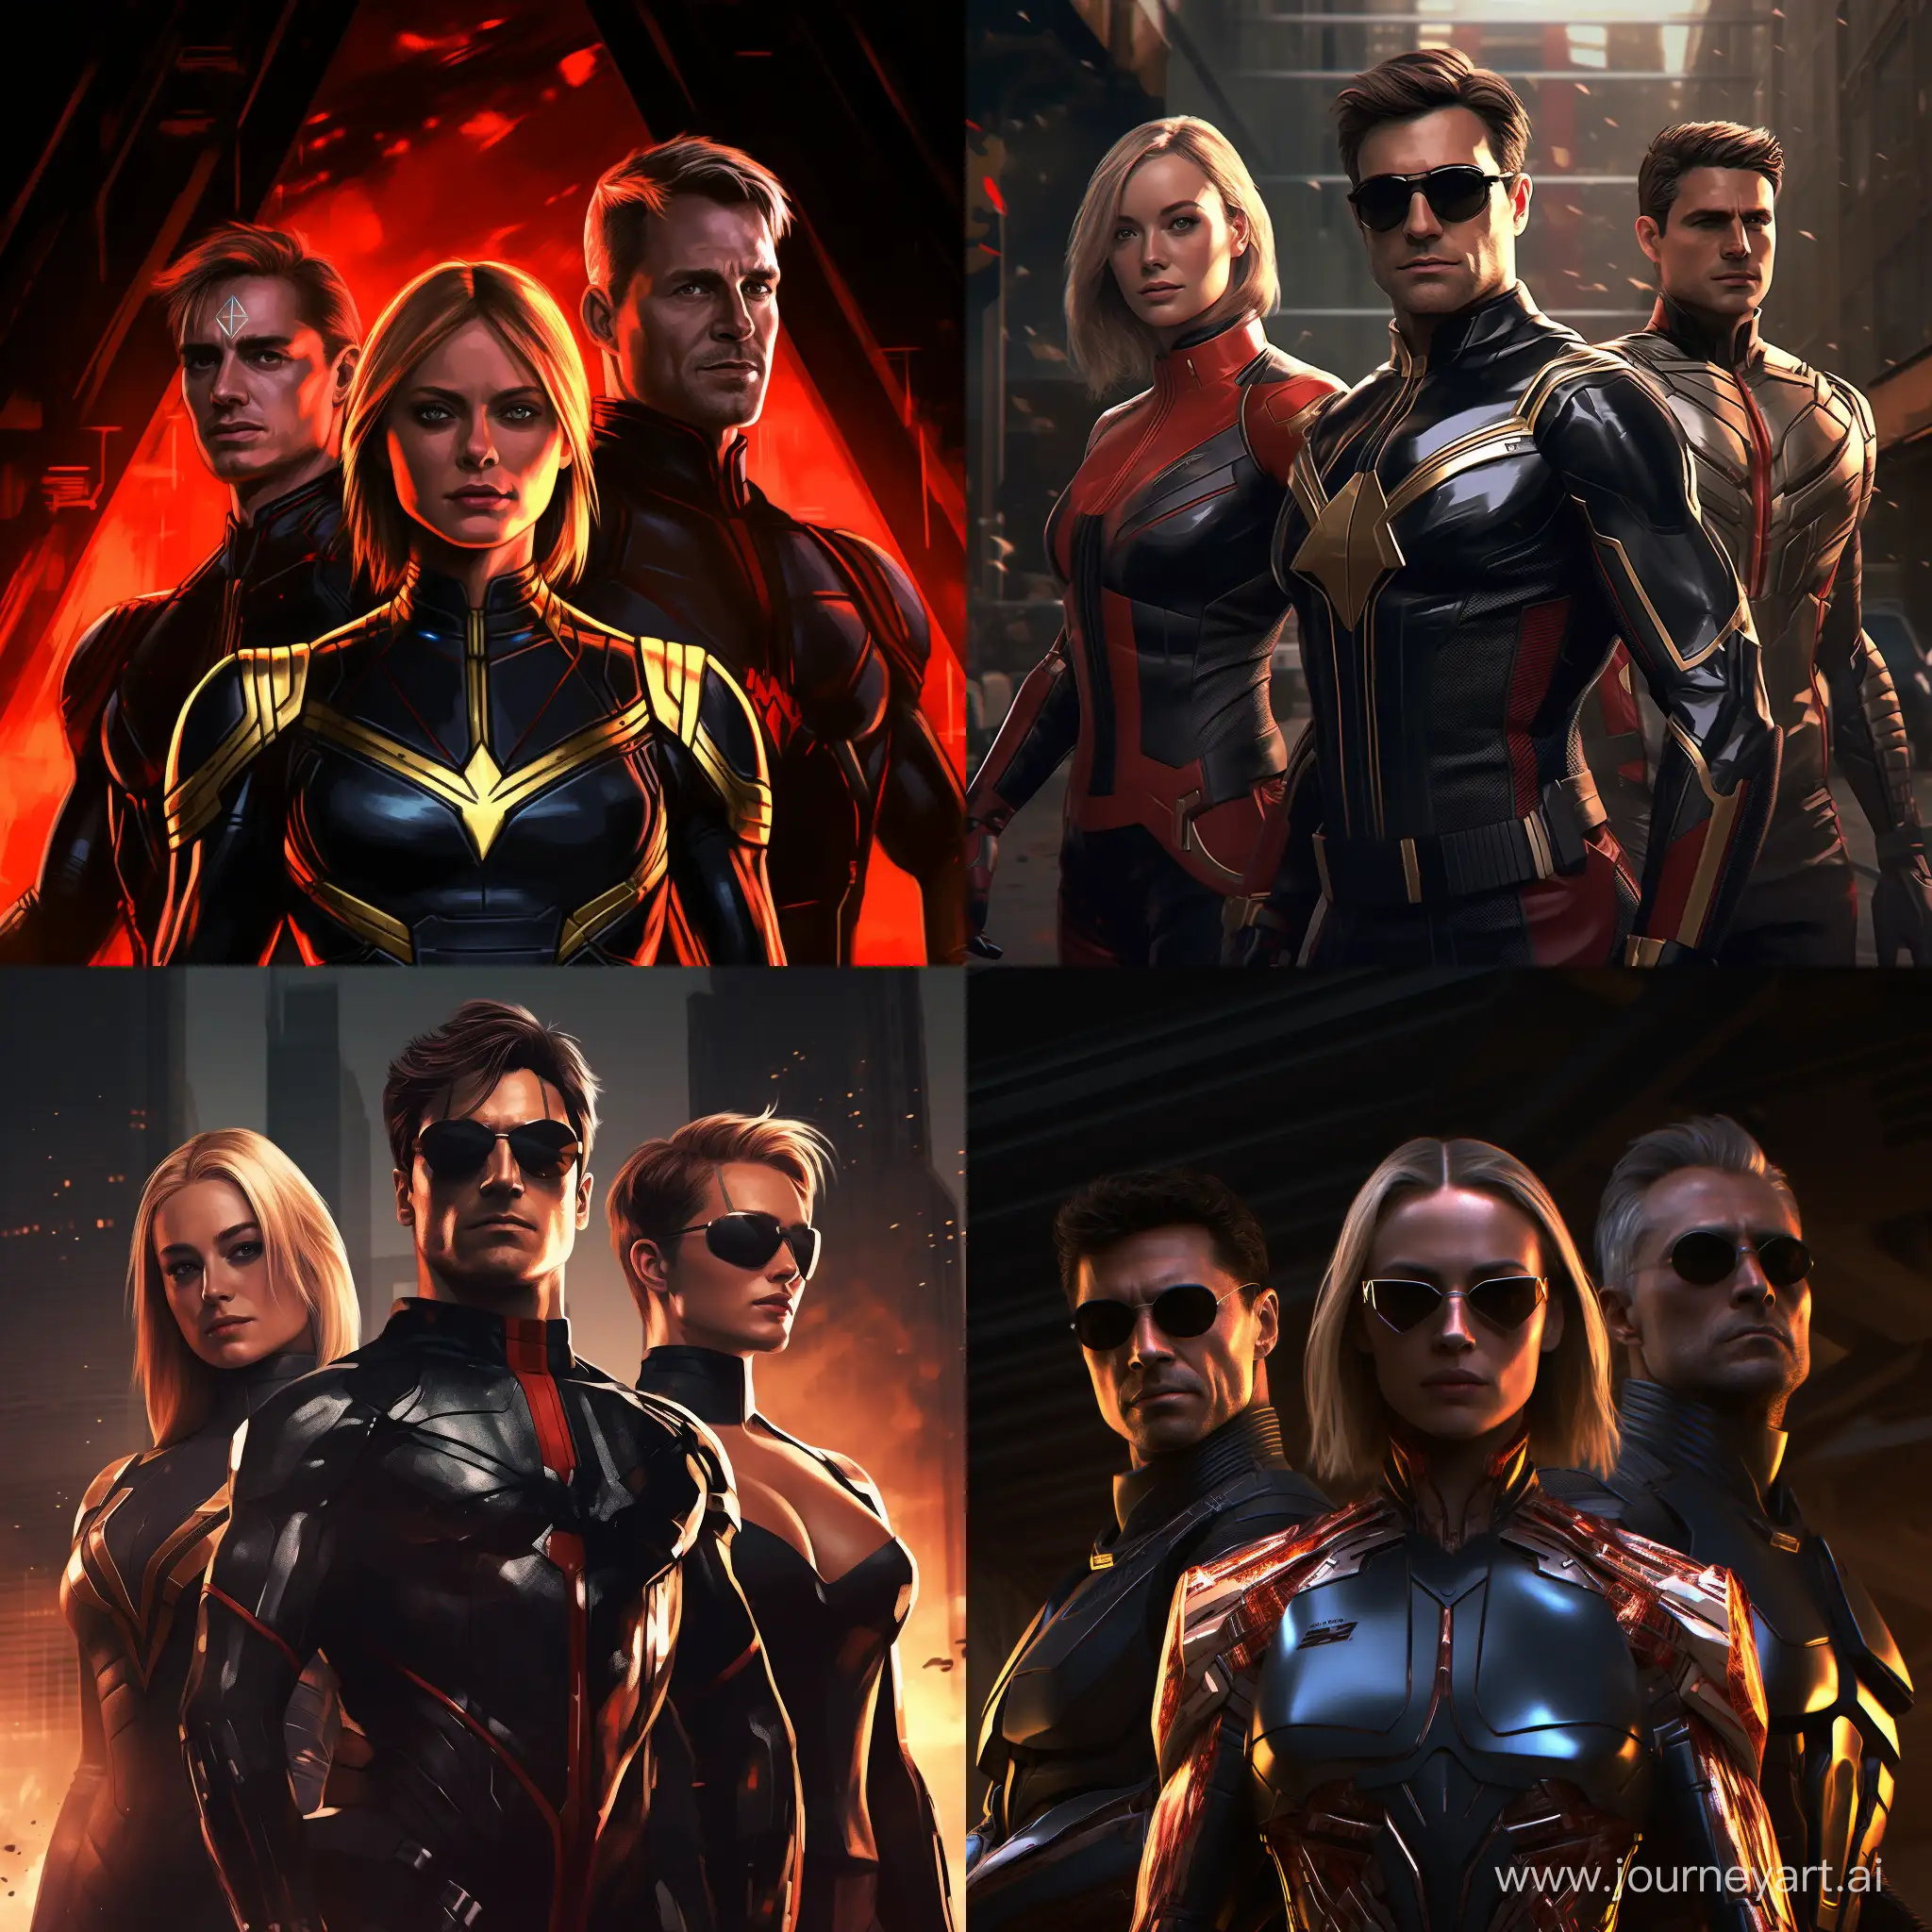 Cybernetic-Hyperrealistic-Captain-Marvel-Daredevil-and-Thor-Fusion-Art